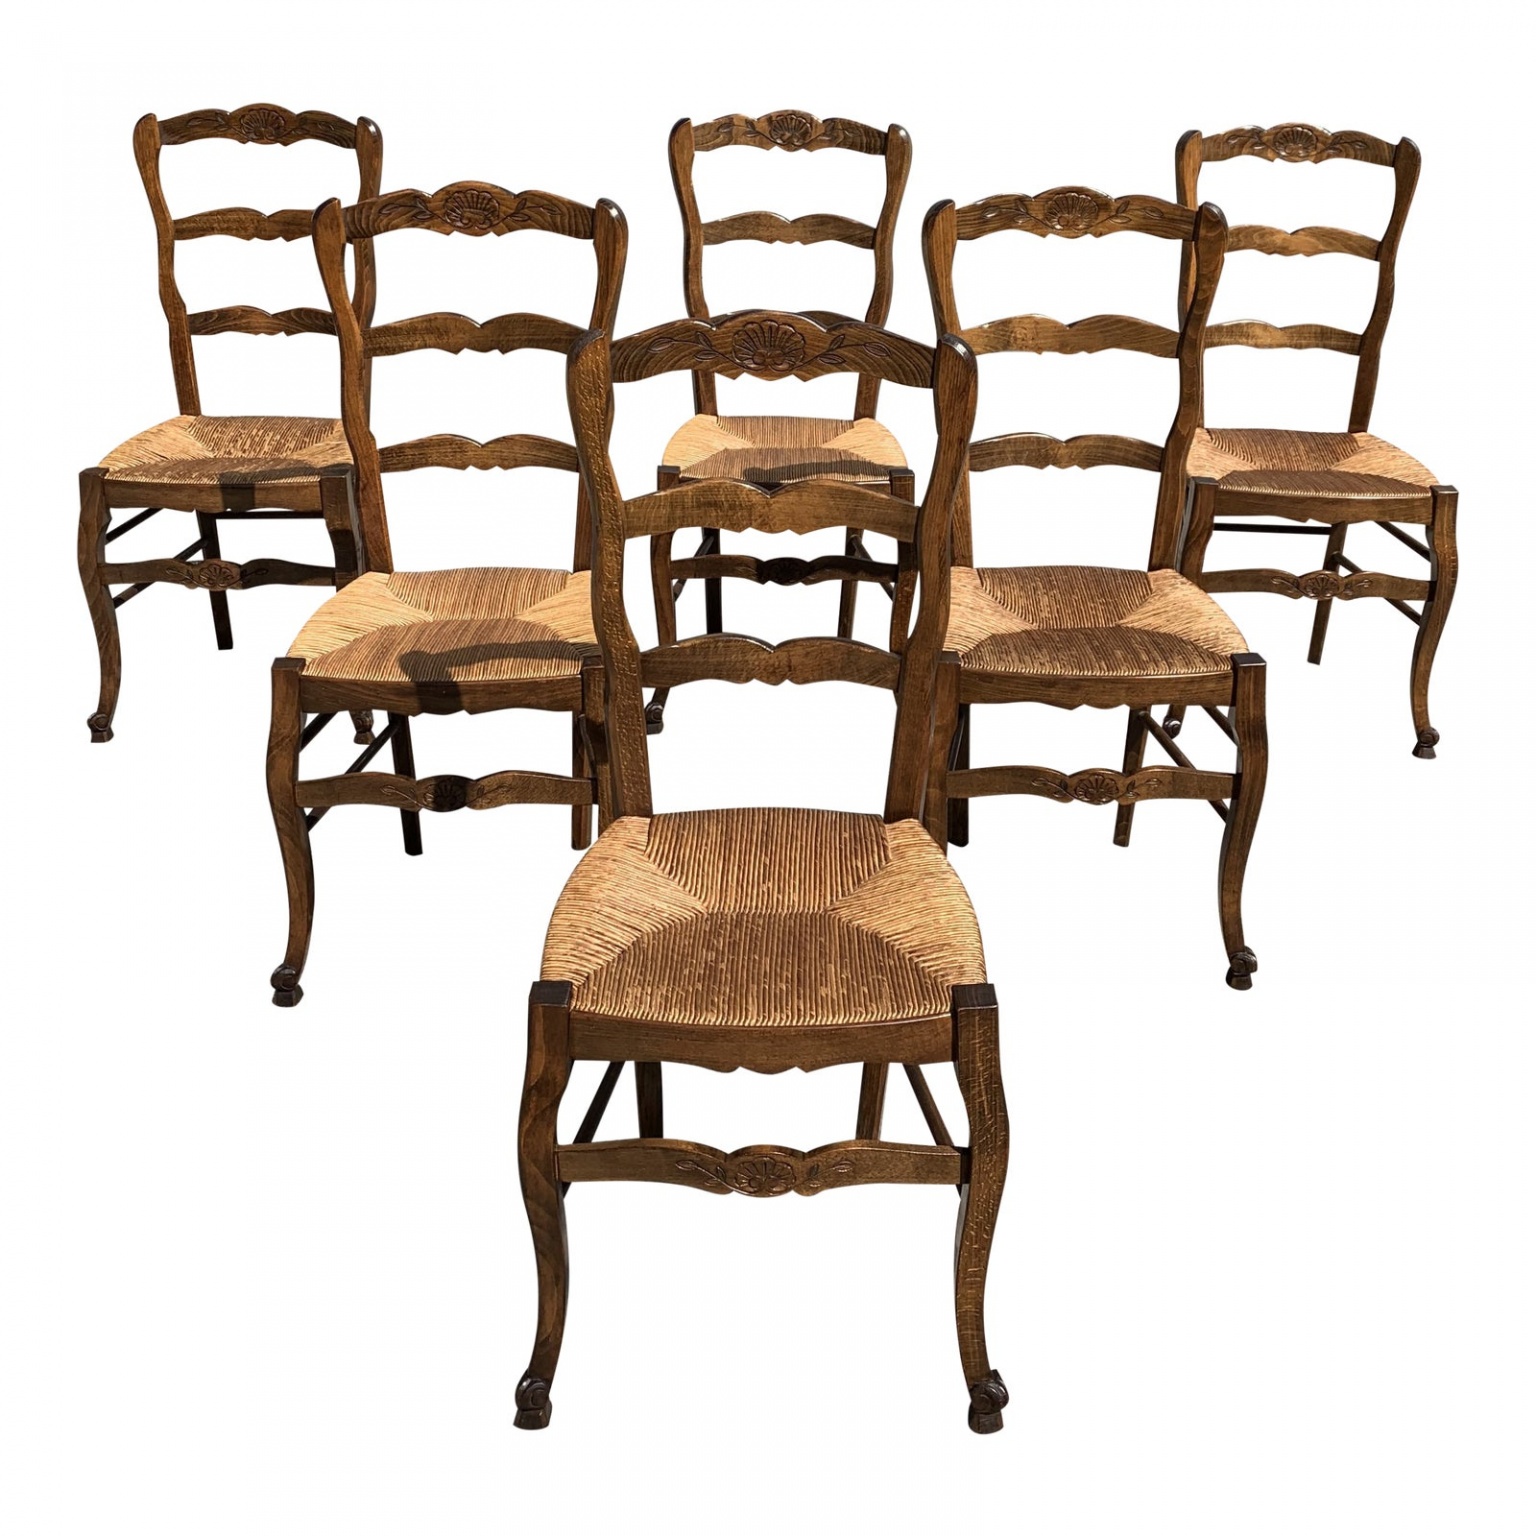 1910s Vintage French Country Rush Seat Walnut Dining Chairs - Set of 6